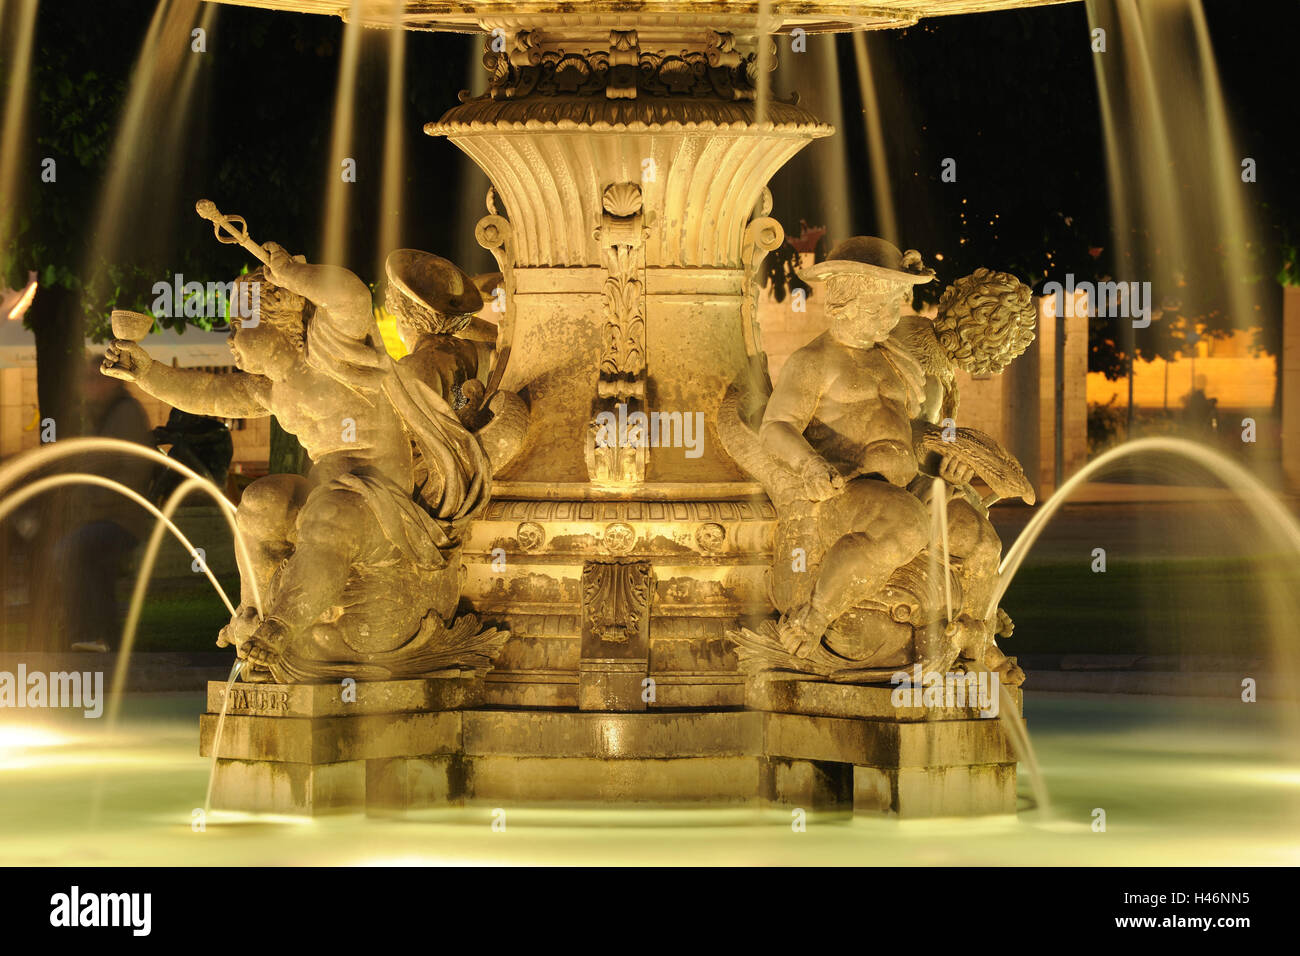 Germany, Baden-Wurttemberg, Stuttgart, fountain, detail, lighting, night, architecture, well, culture, castle square, play water, place of interest, tourism, structure, Pureline, forecourt, destination, nobody, figures, well figures, jets, water jets, Stock Photo